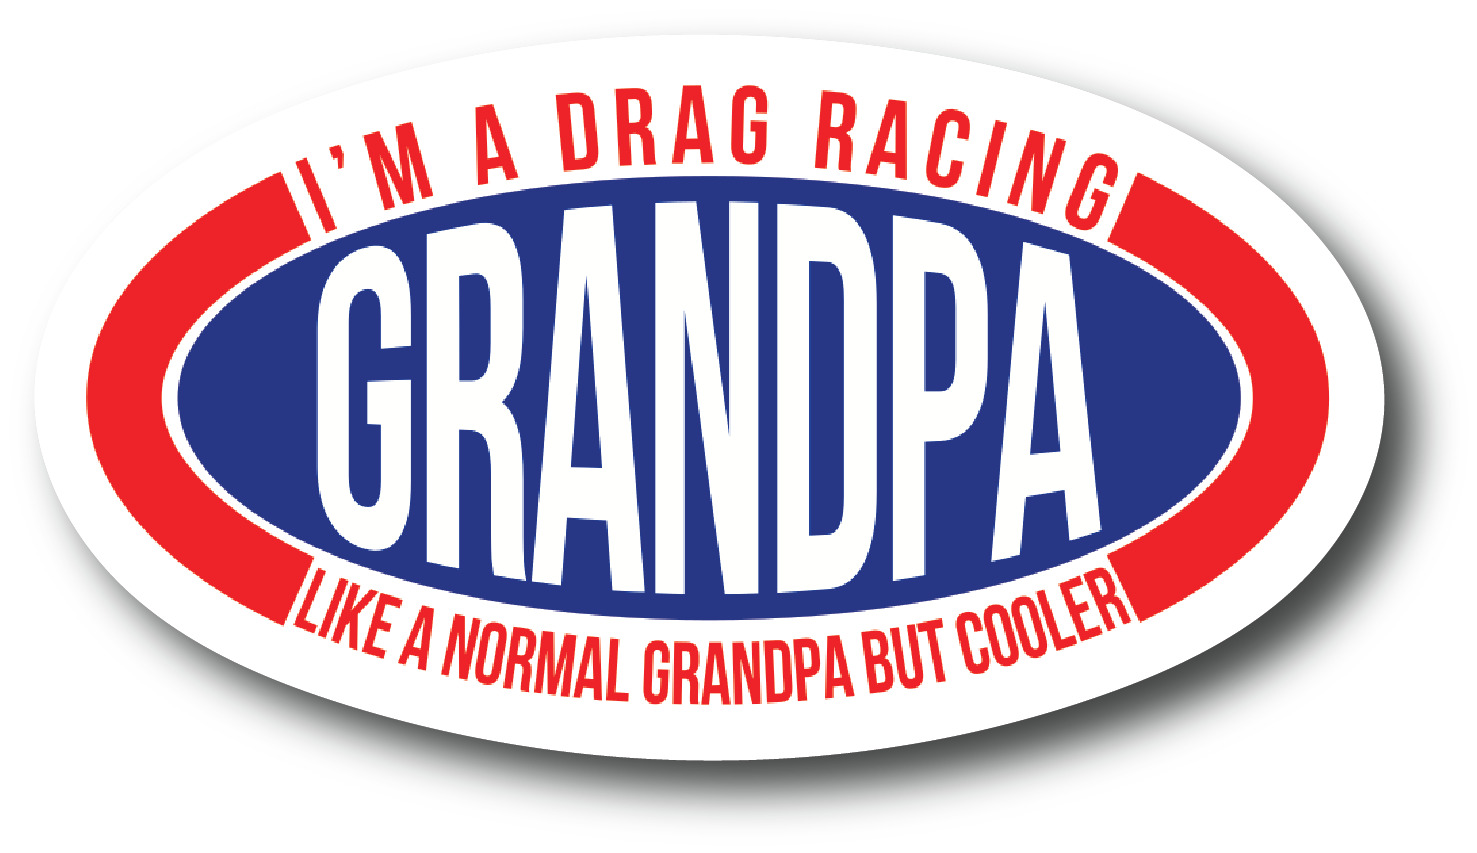 I'm A Drag Racing Grandpa 4.5 Inch 2 Pack Racing Sticker Gift For Your Grandpa